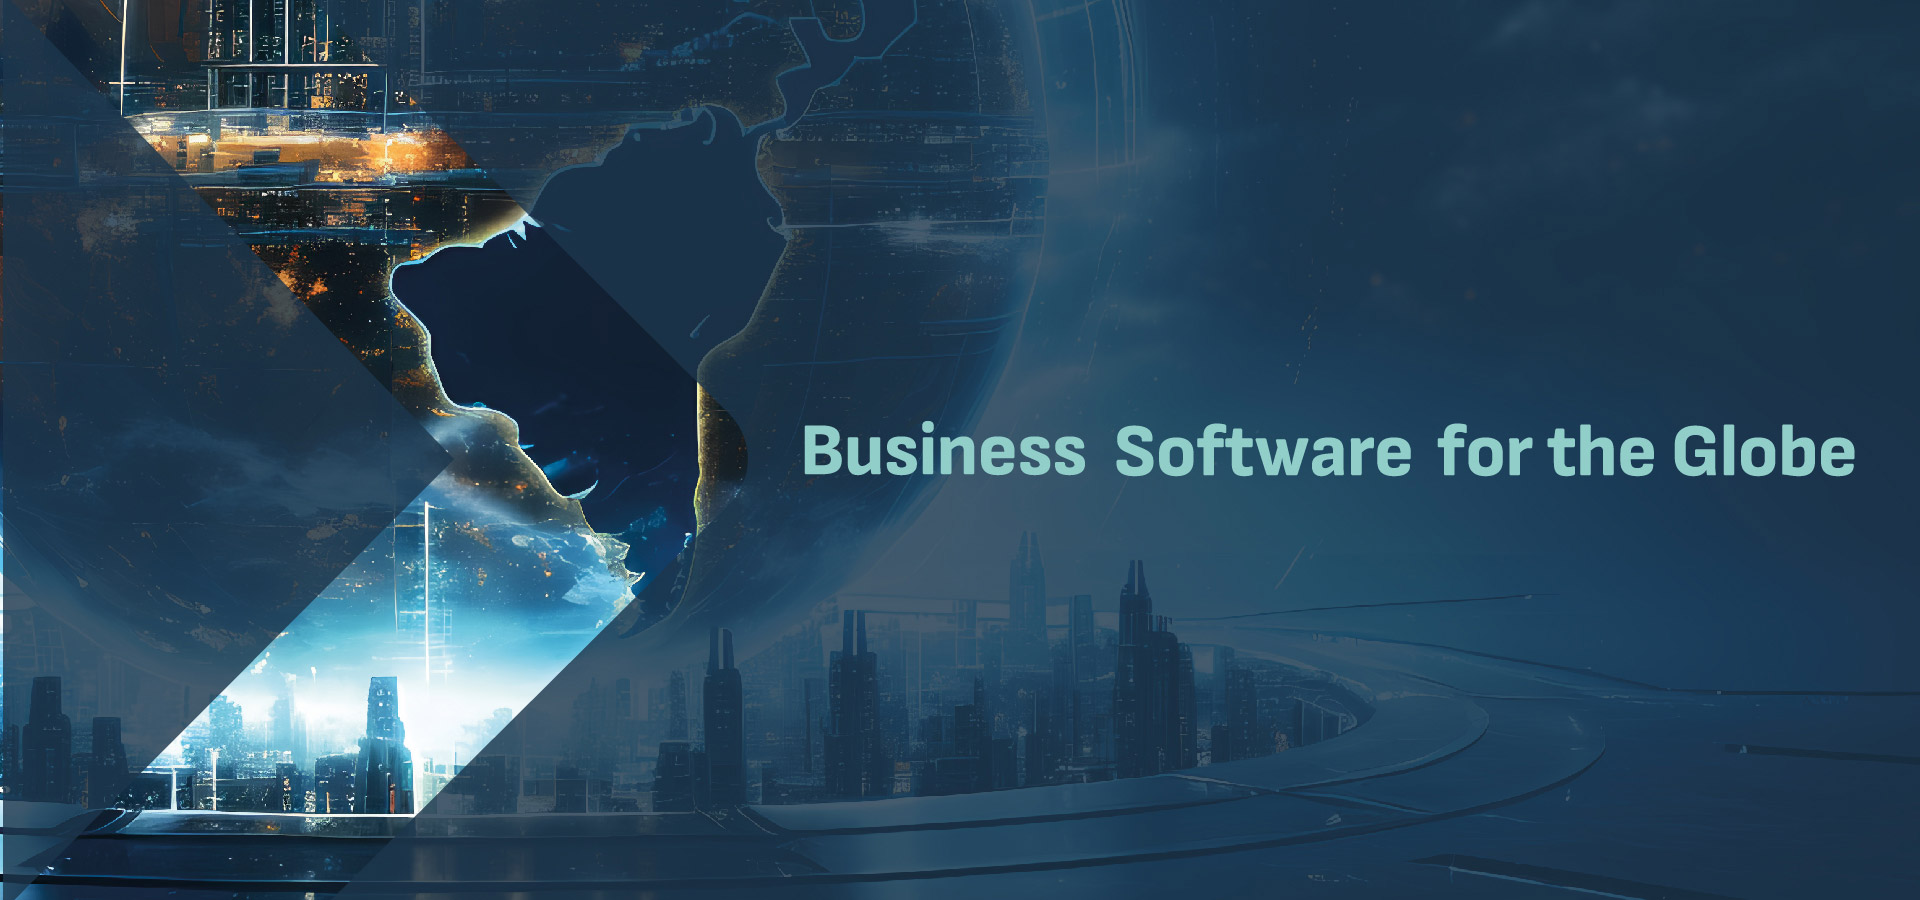 Business Software for the Globe